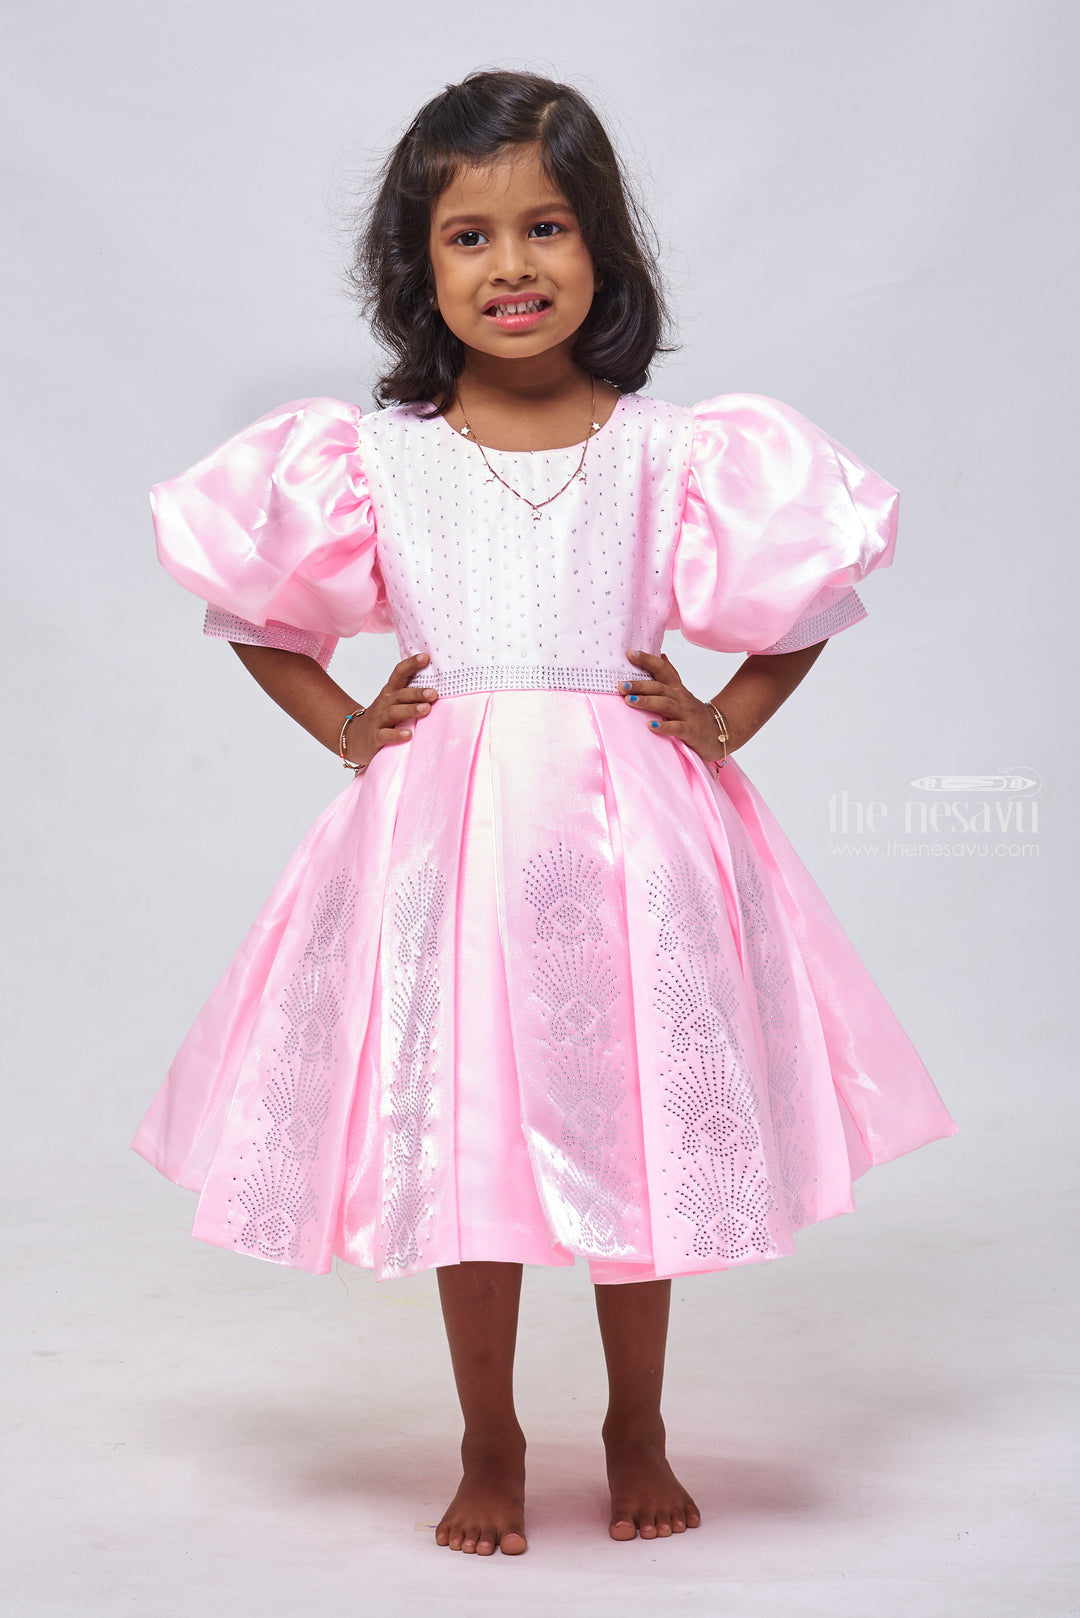 The Nesavu Girls Fancy Party Frock Pink Sparkle: Glitter-Stone Adorned Box Pleated Organza Party Dress for Girls Nesavu 12 (3M) / Pink / Silk Blend PF144A-12 Unique Birthday Frock for 2-Year-Old Girls | Stylish Party Dresses | The Nesavu